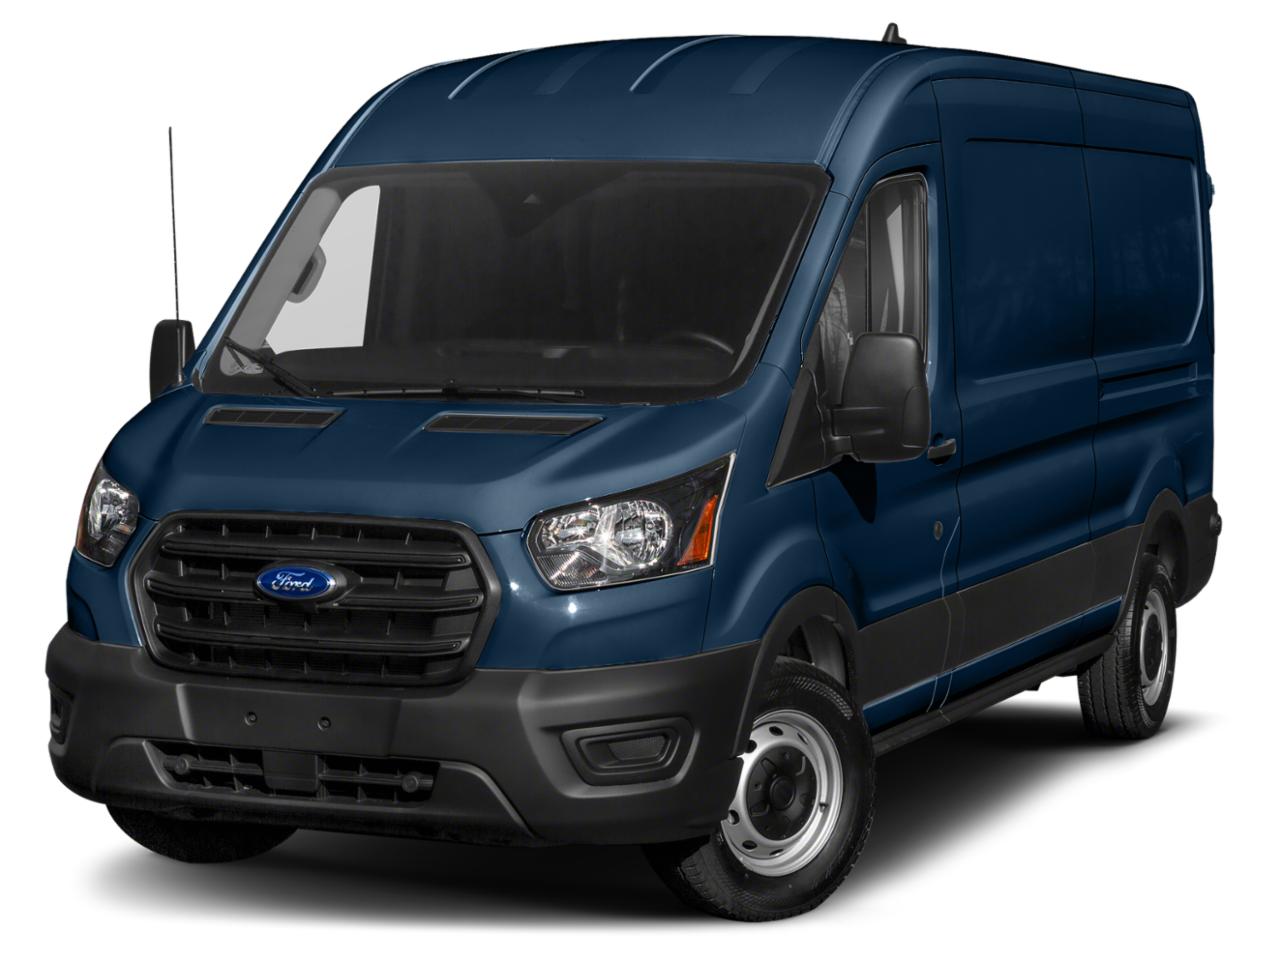 New 21 Ford Bronco Bronco Sport E Series Cutaway E Series Stripped Chassis E Transit Cargo Van E Transit Chassis E Transit Cutaway Ecosport Edge Escape Expedition Expedition Max Explorer F 150 F 53 Motorhome Stripped Chassis F 59